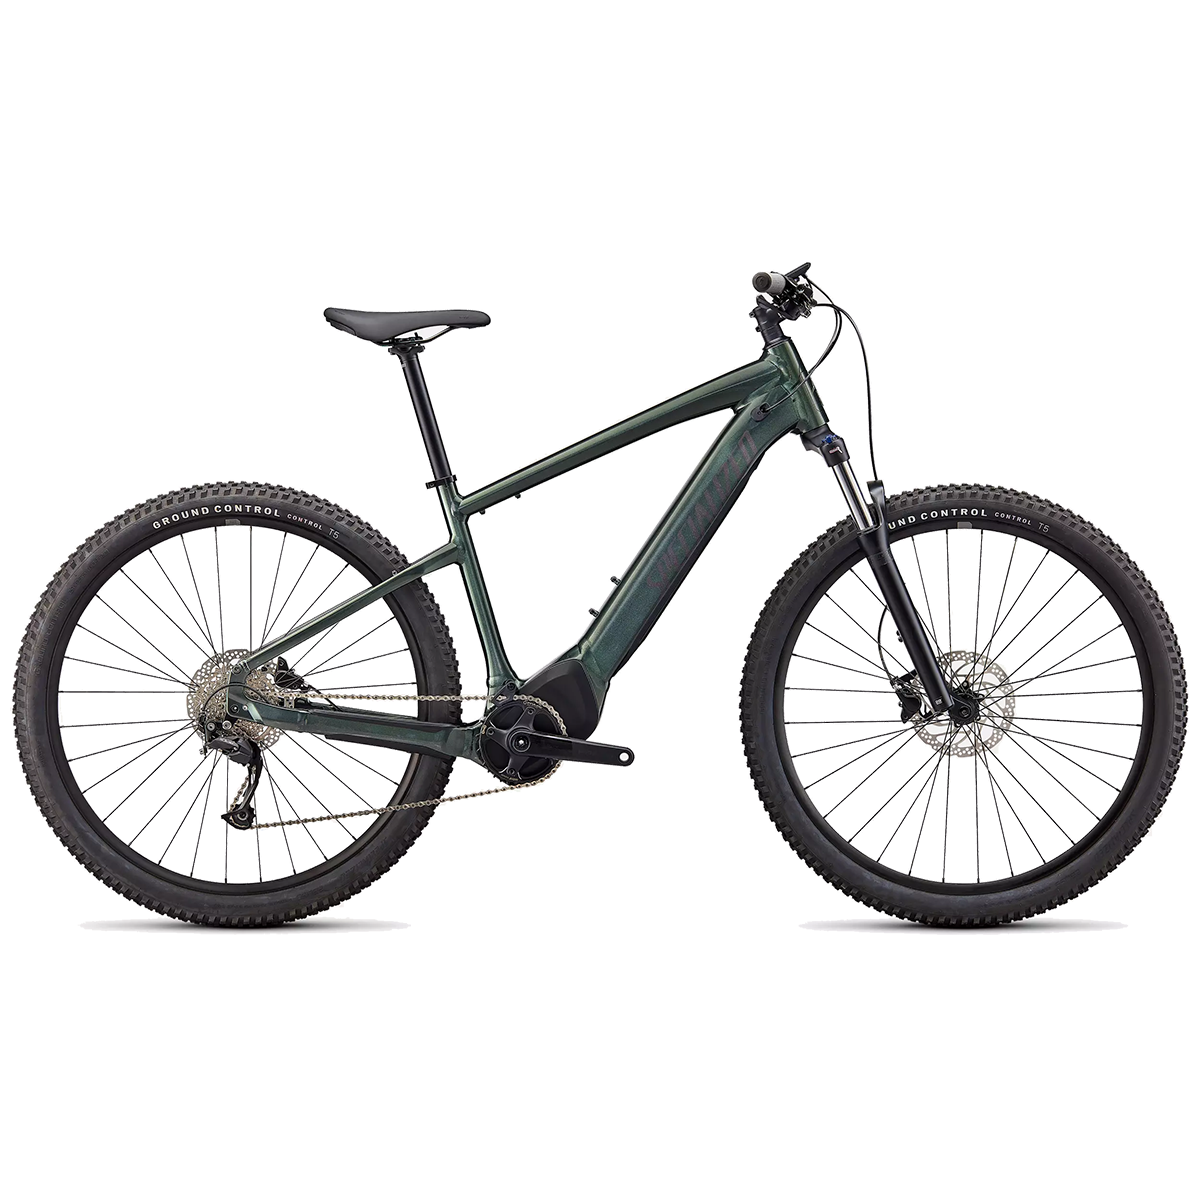 Specialized Tero 3.0, , large image number null